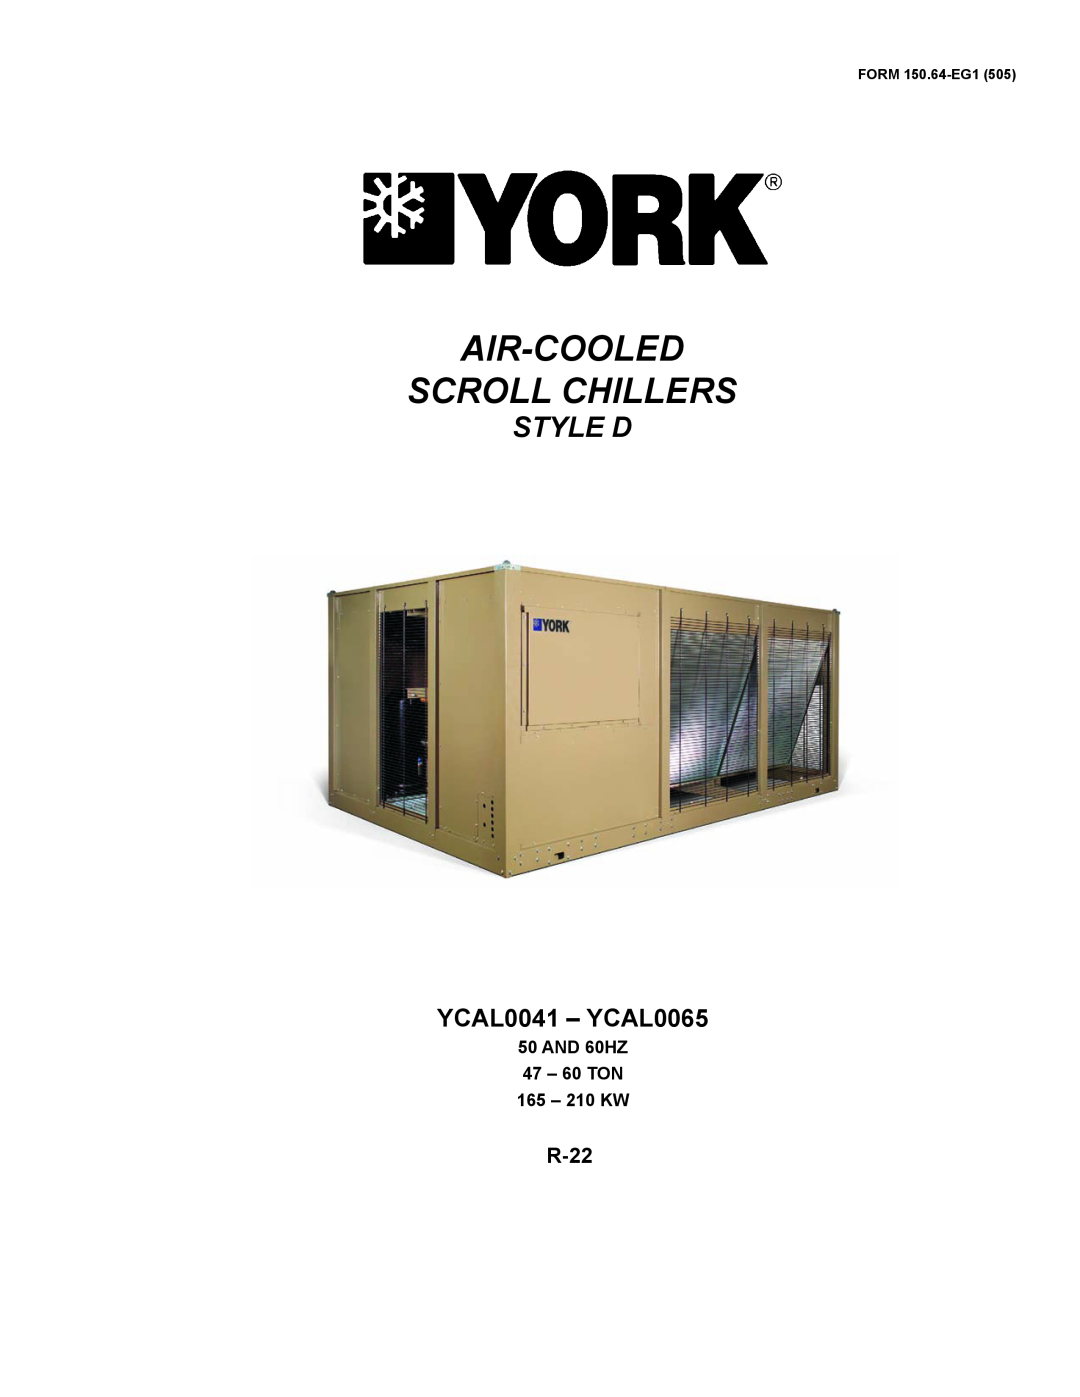 York manual YCAL0041 - YCAL0065, R-22, Air-Cooled Scroll Chillers, Style D 